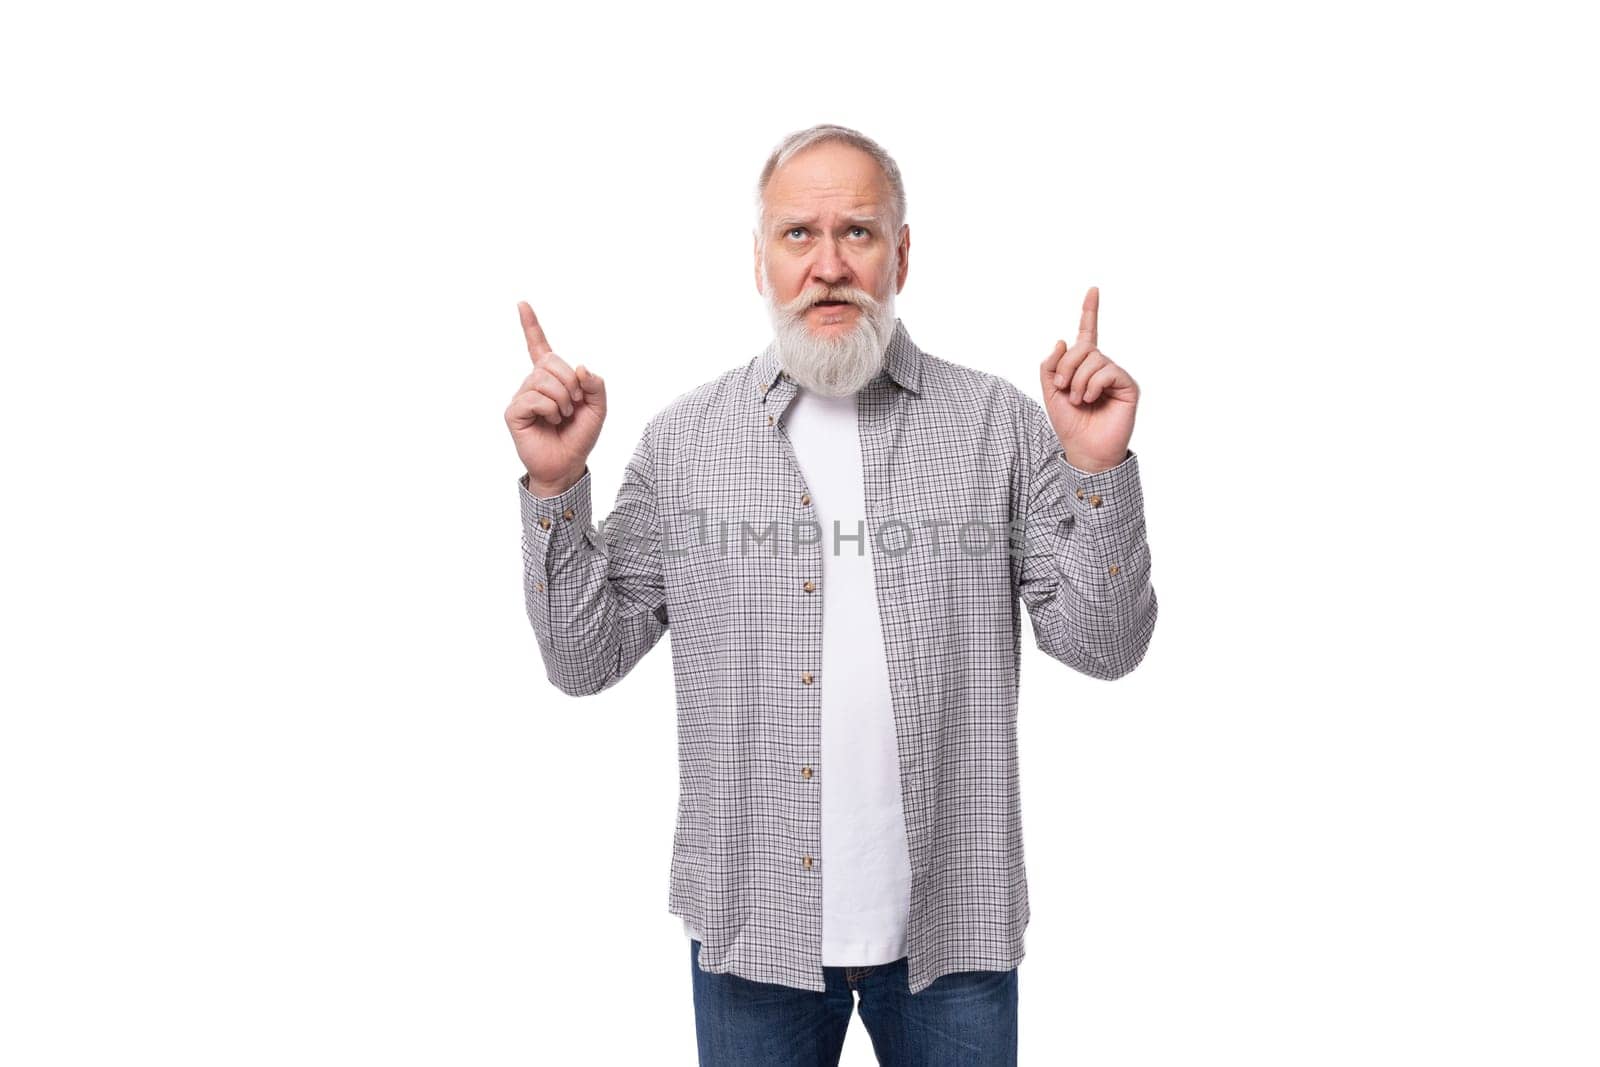 stylish mature man with a white beard and mustache dressed in a plaid shirt over a white t-shirt.